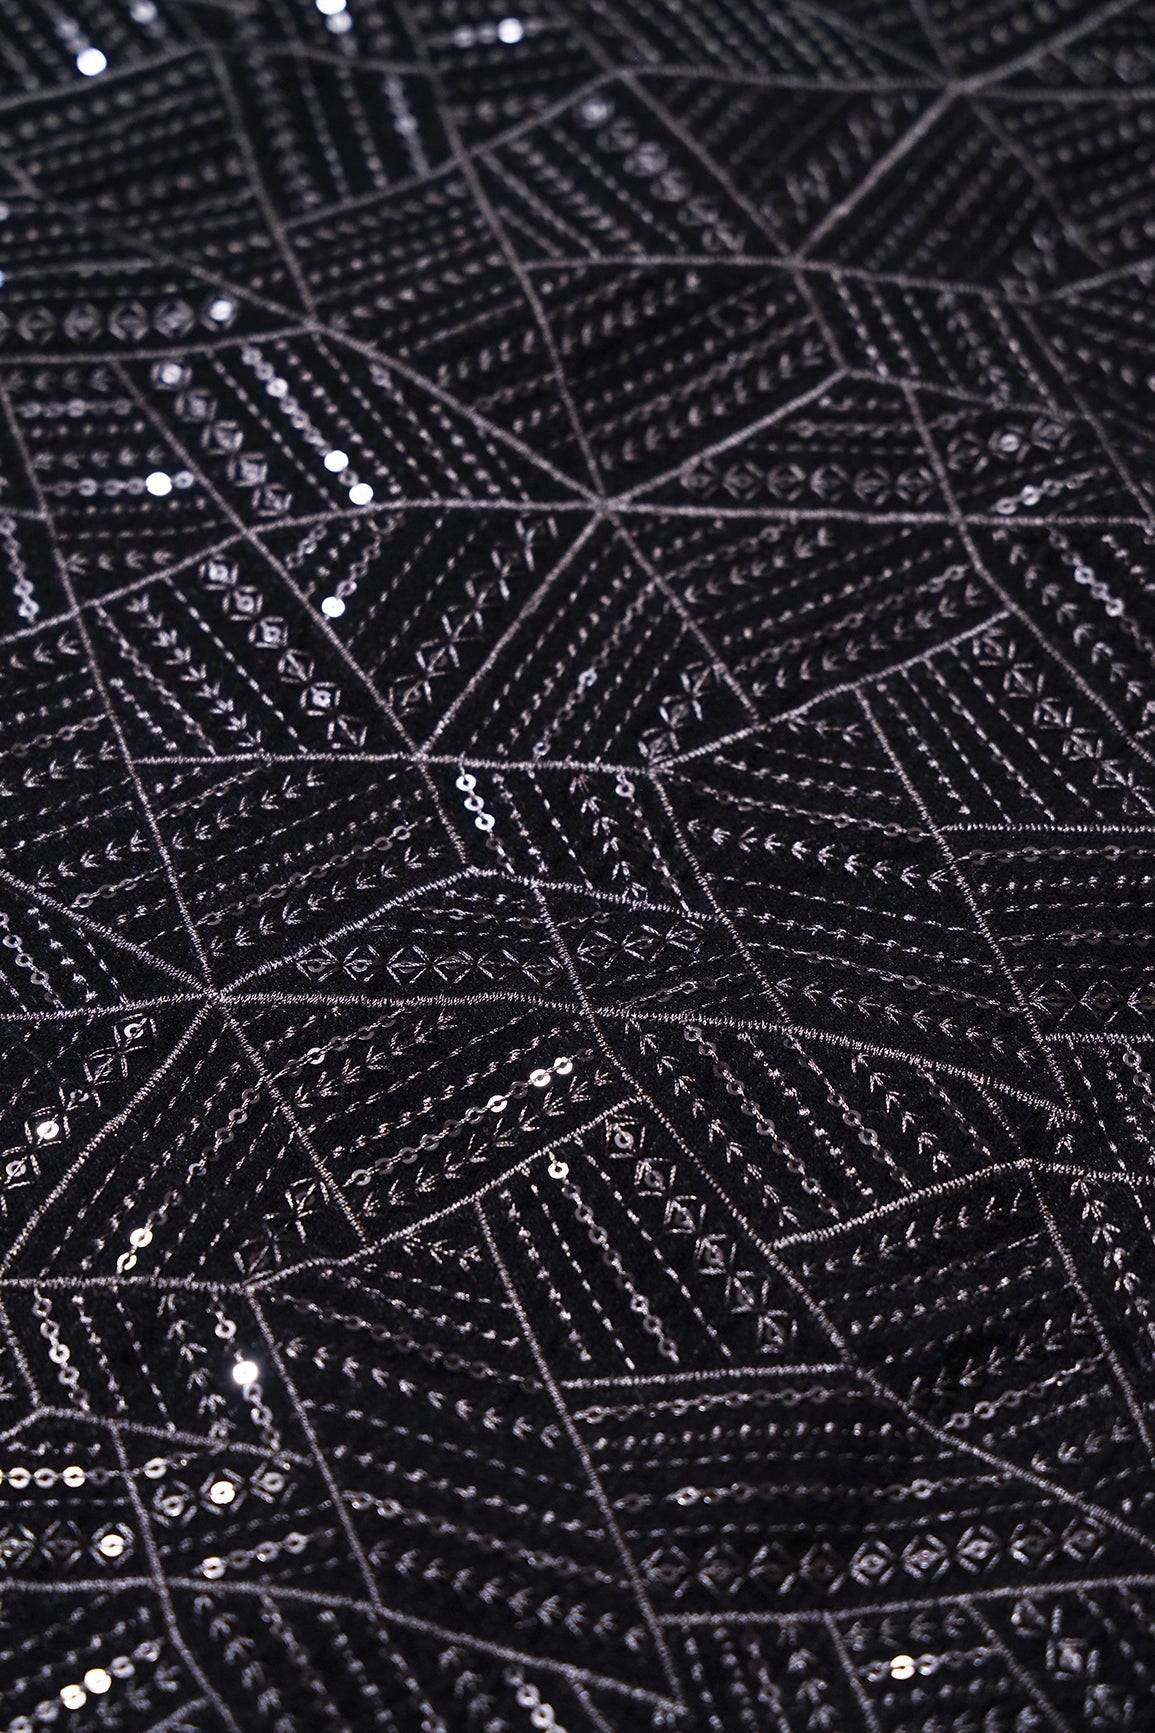 3.50 Meter Cut Piece Of Black Thread With Sequins Geometric Embroidery Work On Black Velvet Fabric - doeraa